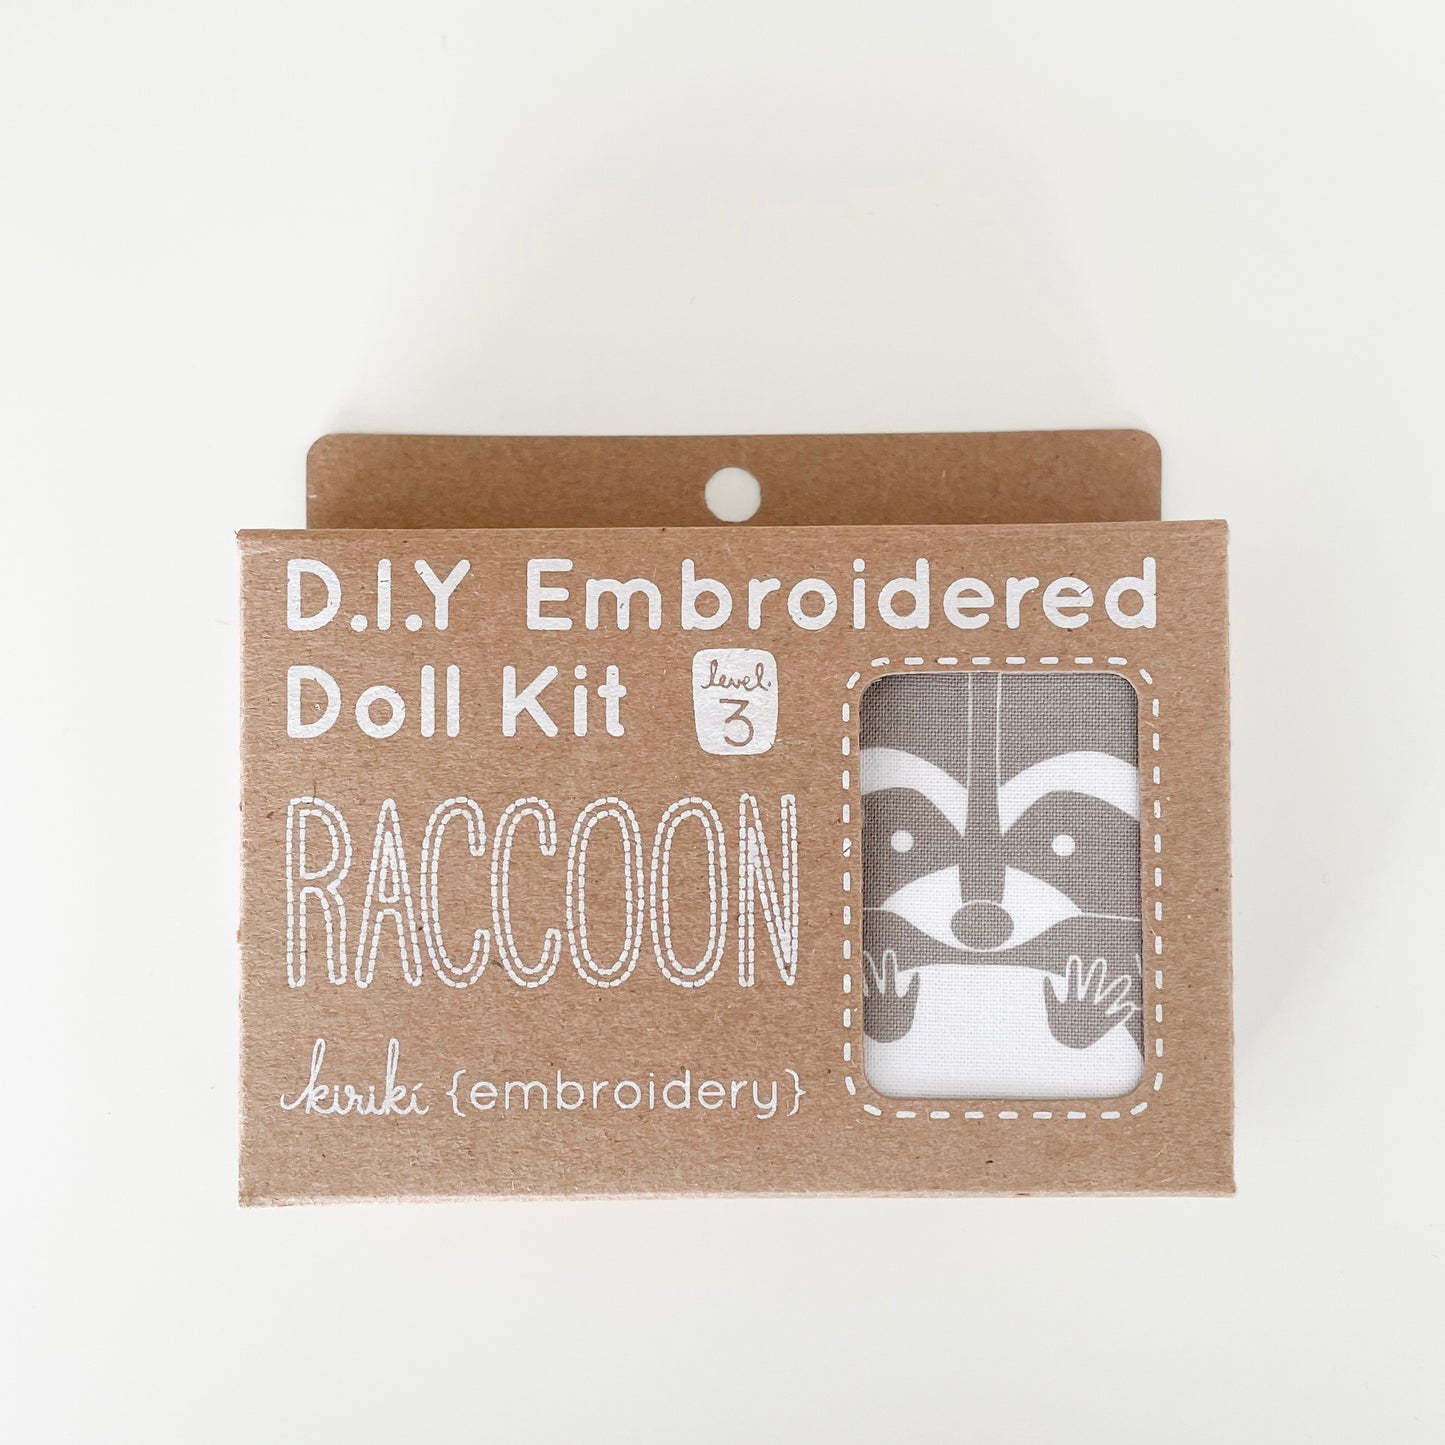 Embroidered Doll Kit - Racoon Level 3